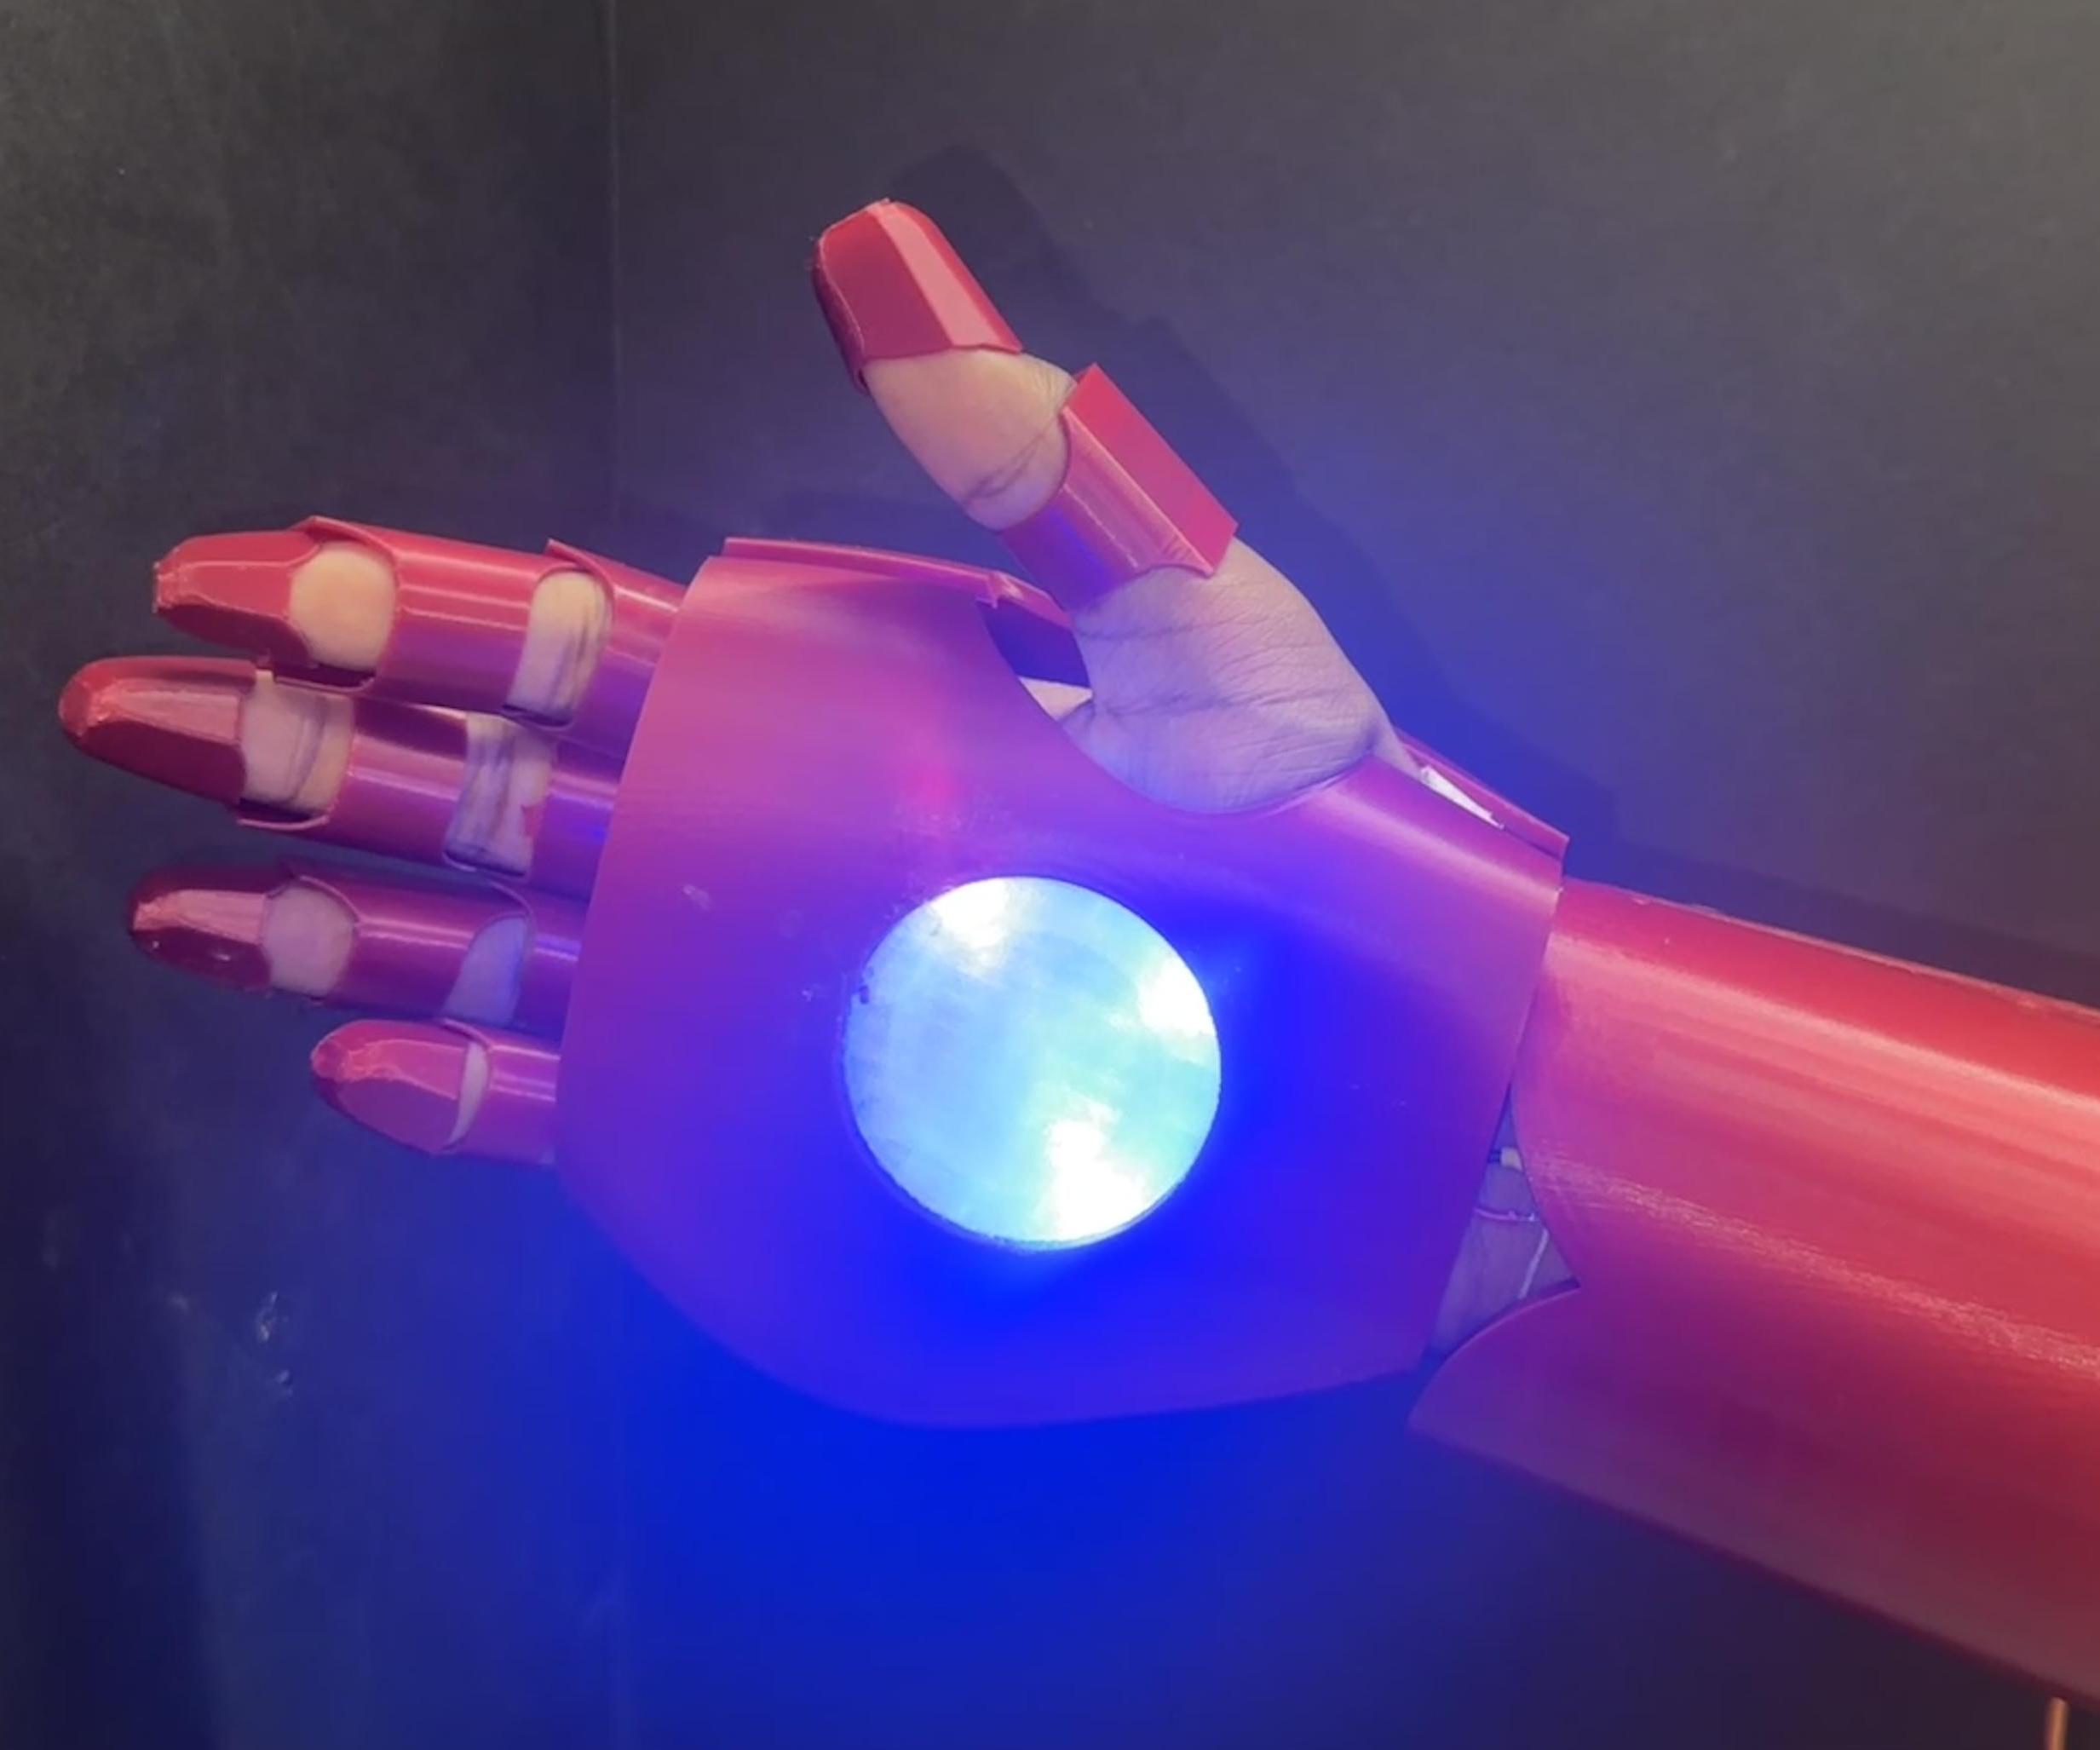 The Iron Man Gauntlet: Turn Your Fantasies Into Reality